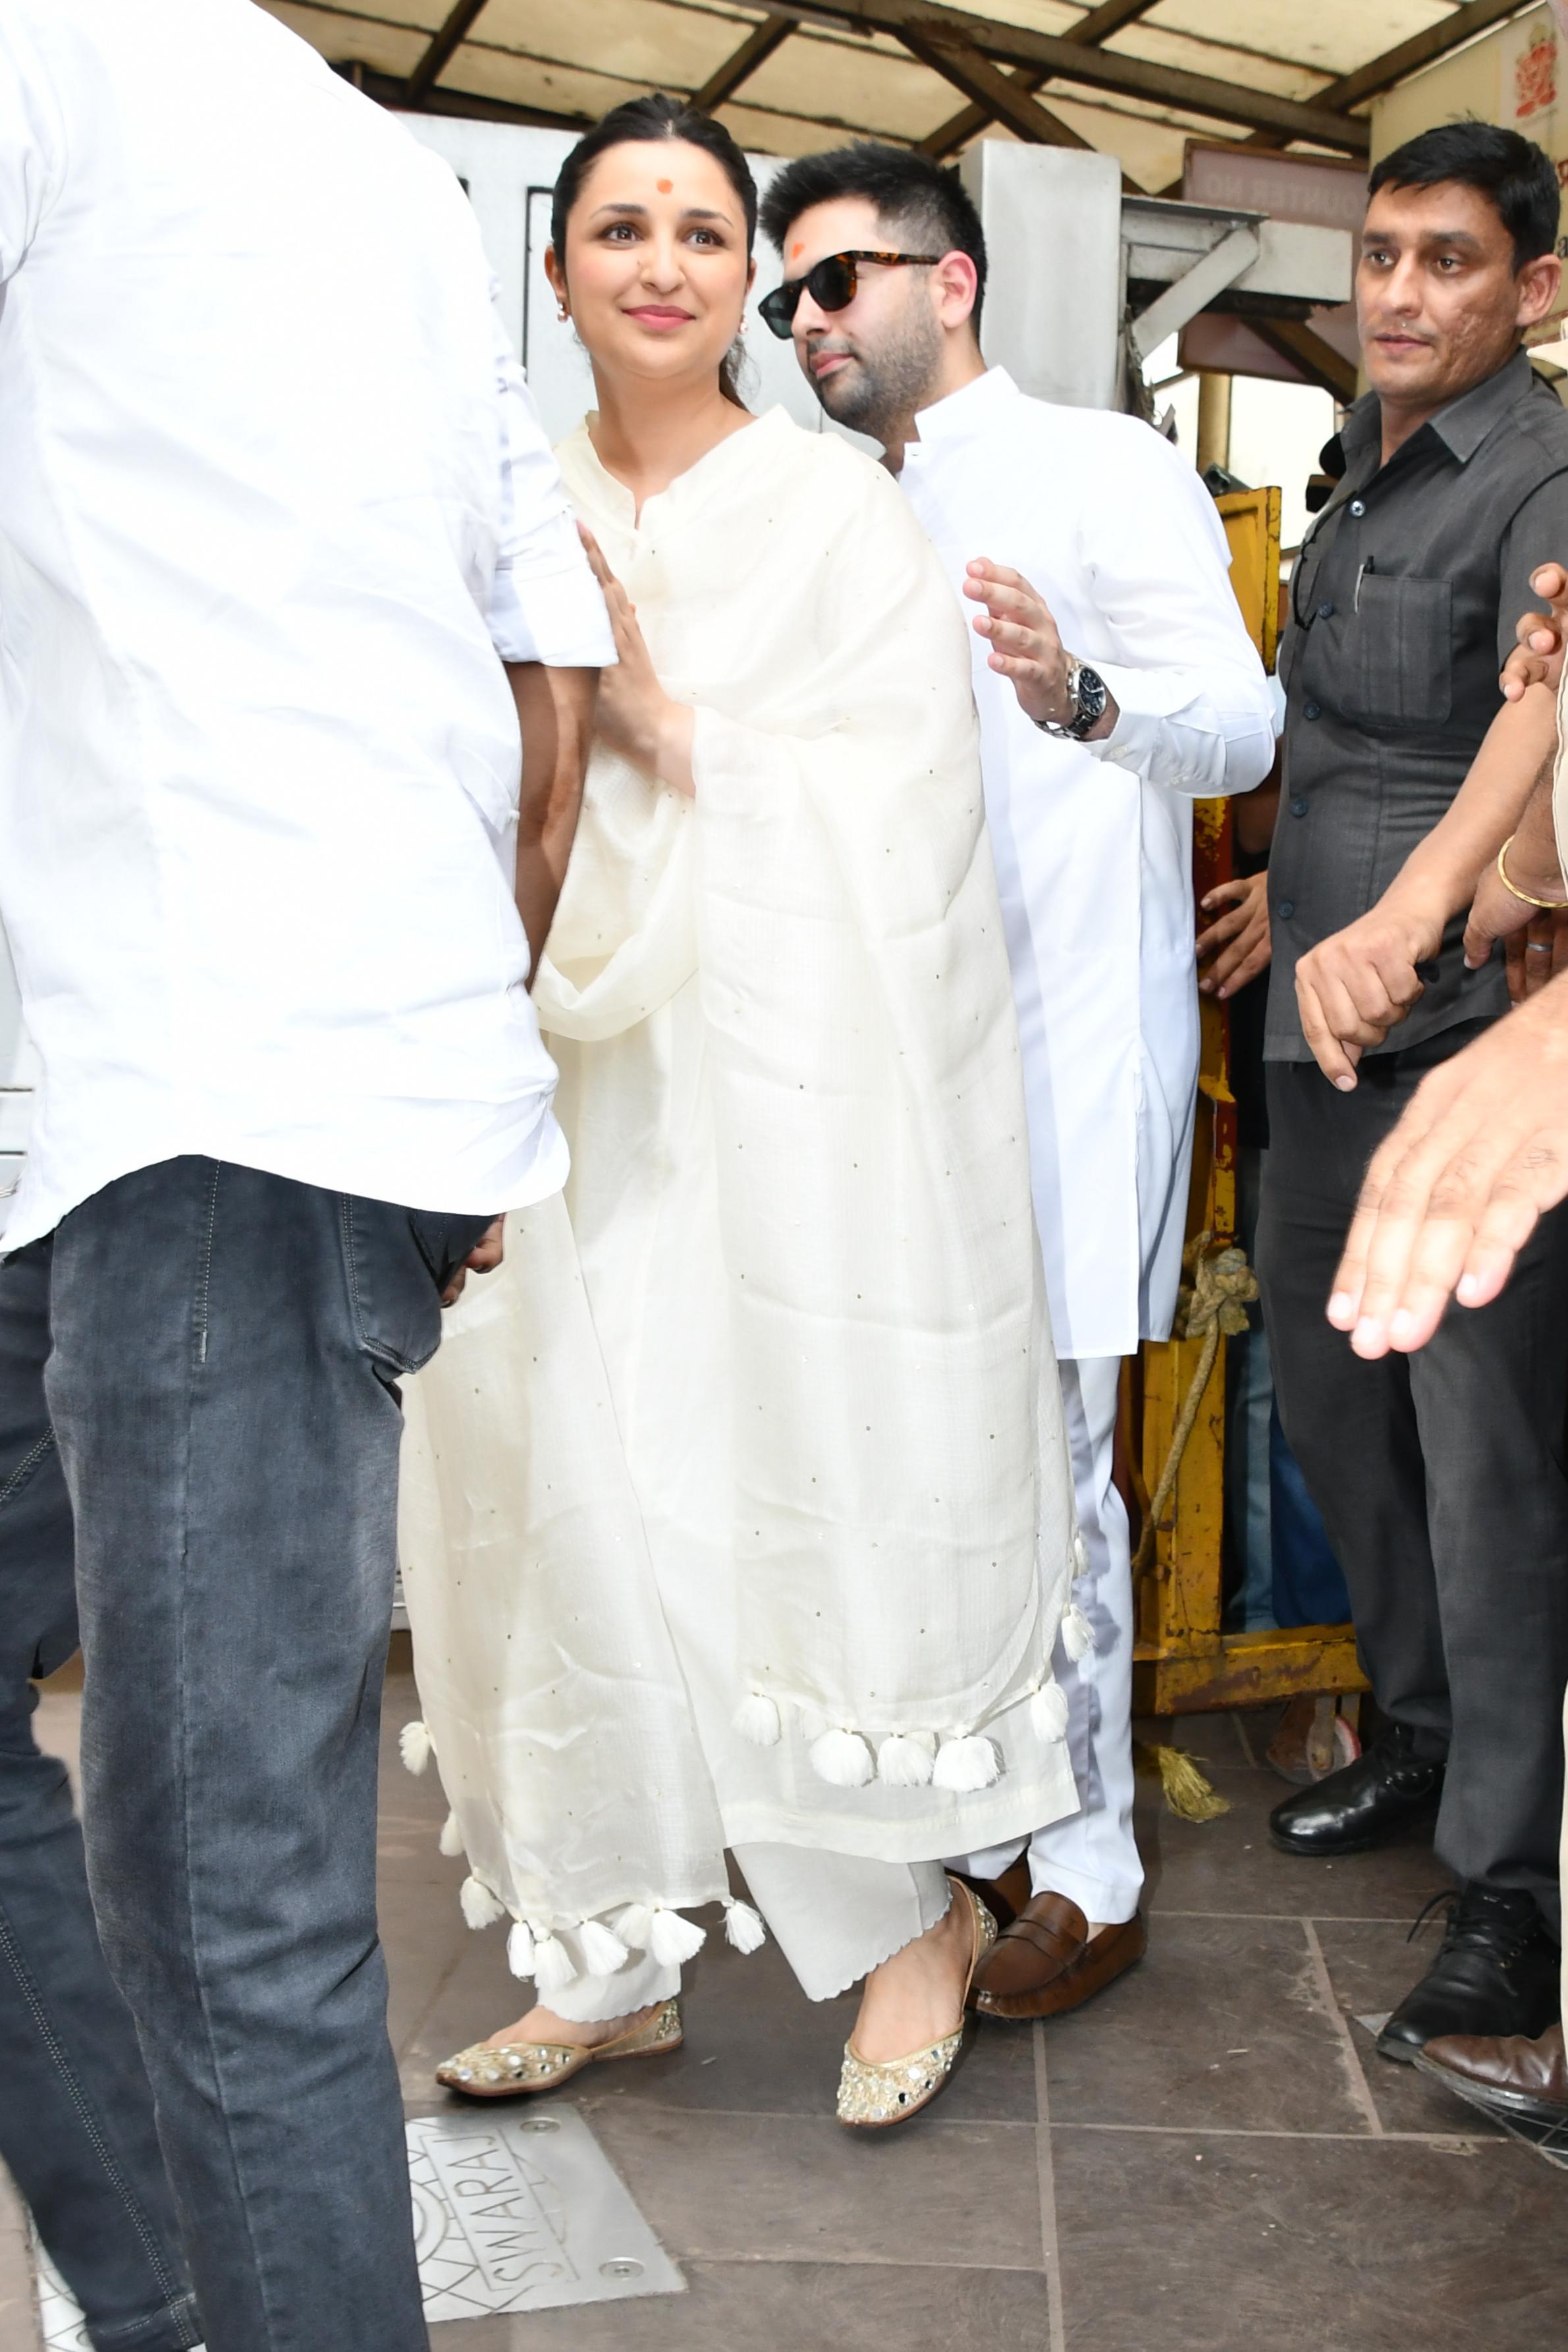 The couple were clad in all-white ensembles as they stopped by to do darshan